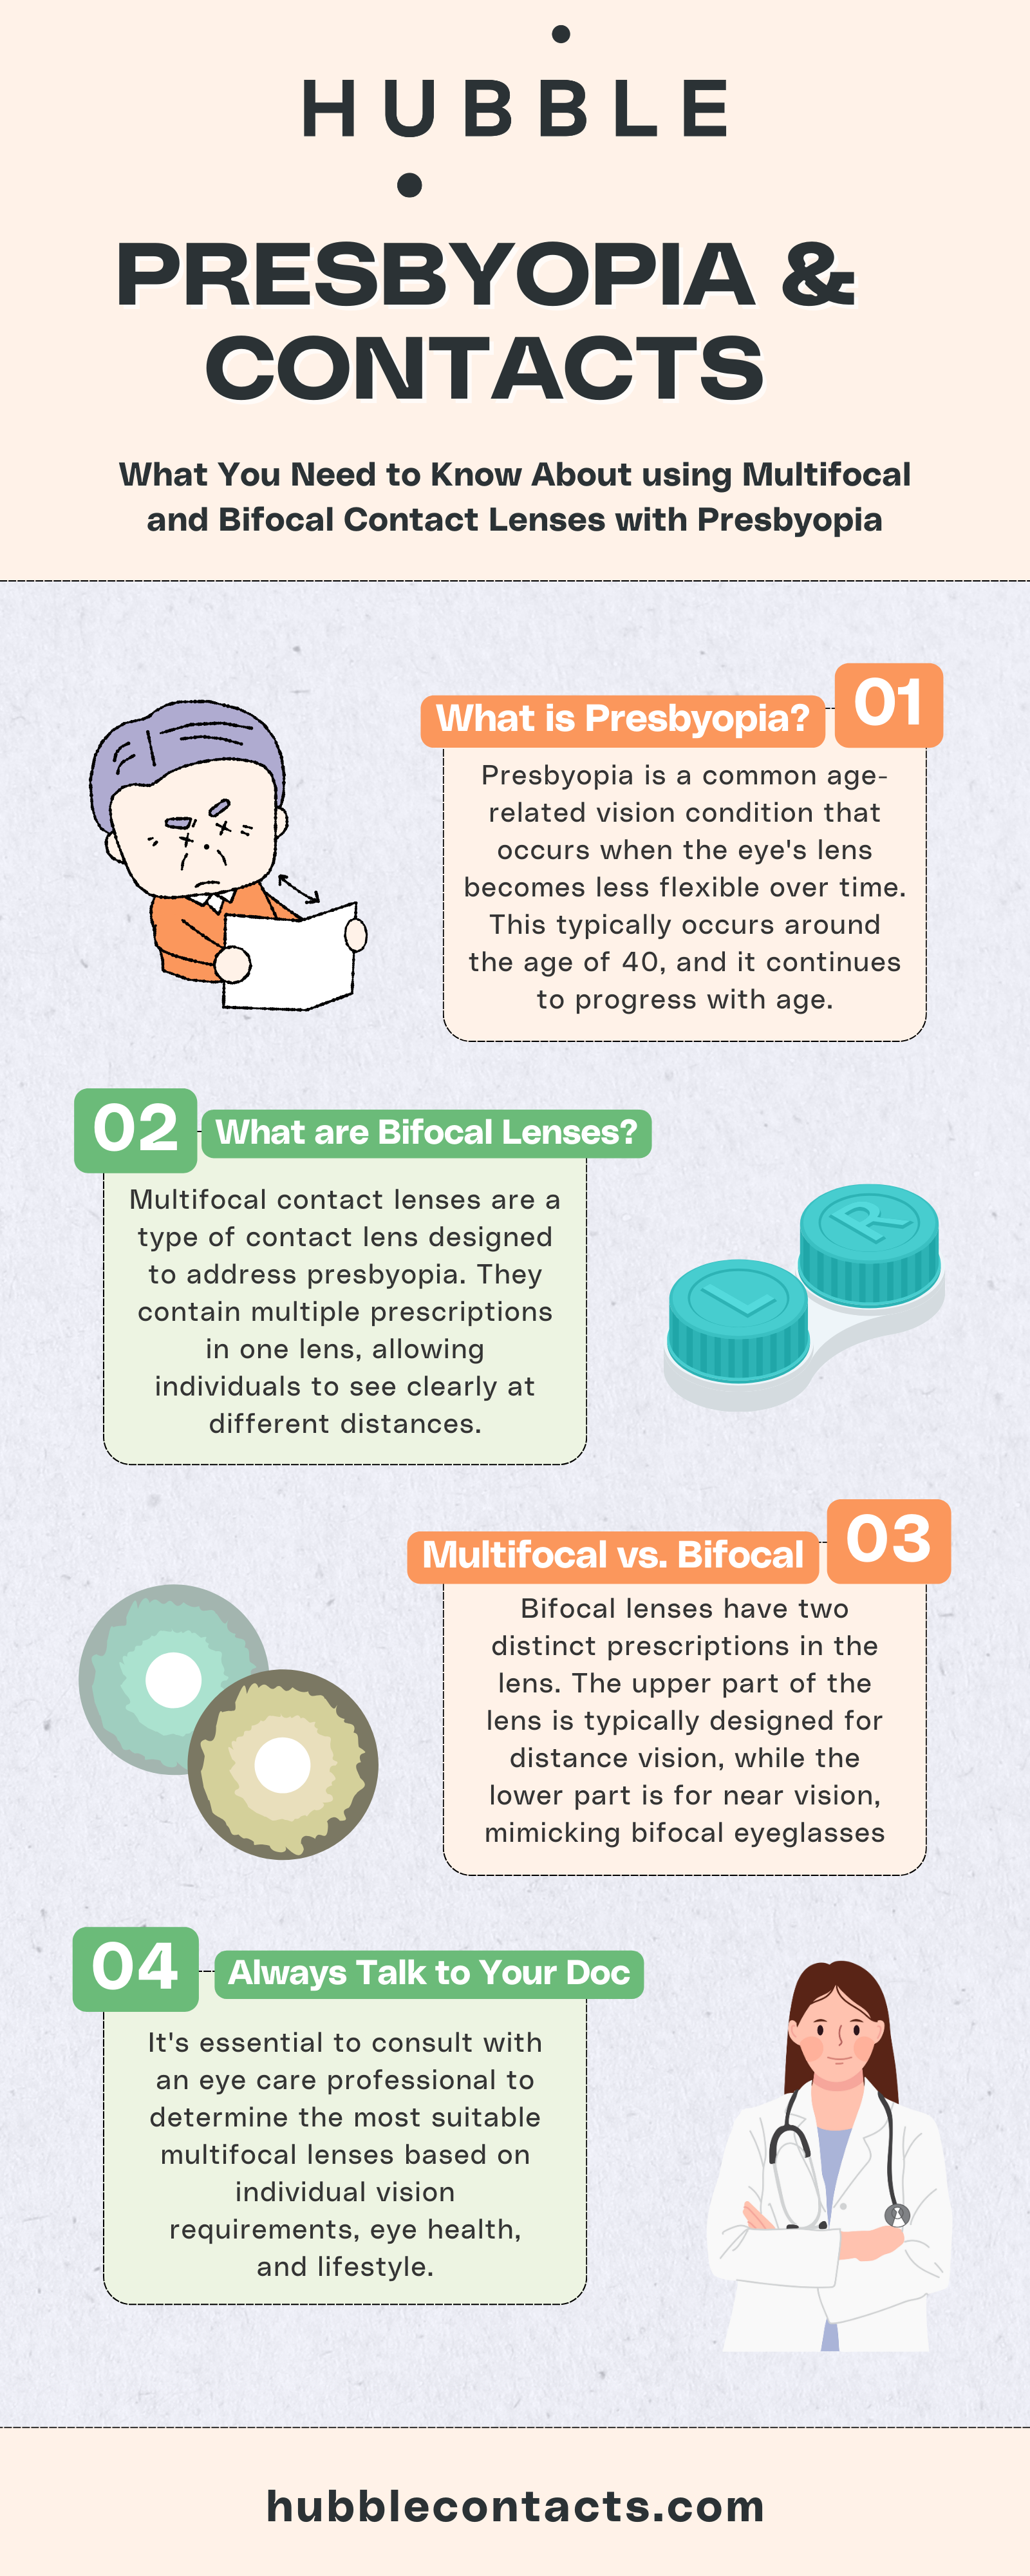 Presbyopia and Multifocal Contact Lenses Infographic